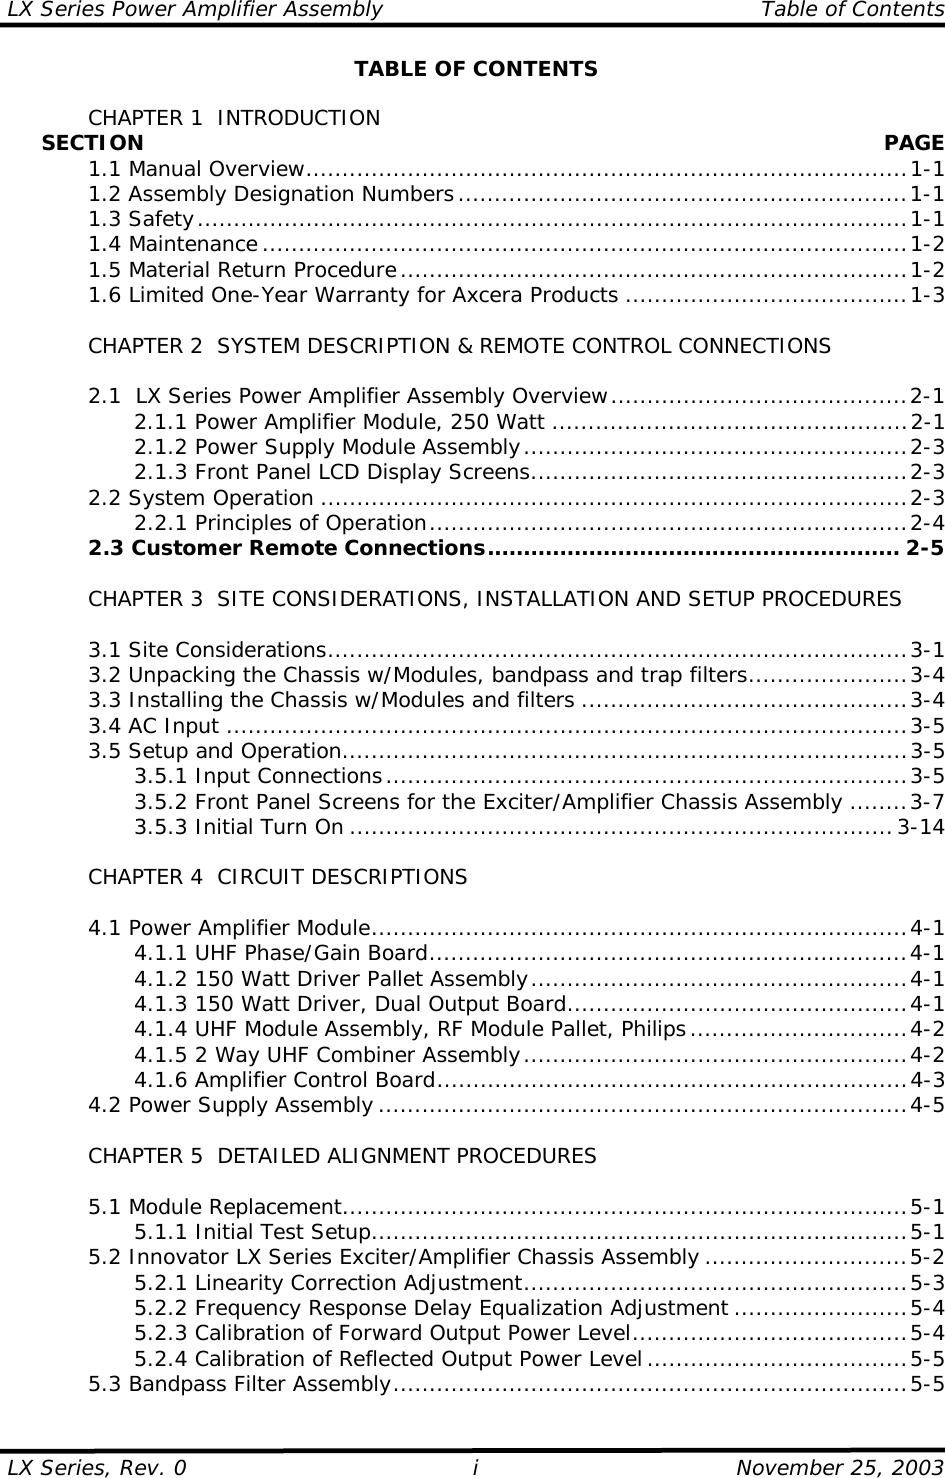 LX Series Power Amplifier Assembly    Table of Contents  LX Series, Rev. 0    November 25, 2003 i TABLE OF CONTENTS    CHAPTER 1  INTRODUCTION      SECTION   PAGE  1.1 Manual Overview...................................................................................1-1   1.2 Assembly Designation Numbers..............................................................1-1  1.3 Safety..................................................................................................1-1  1.4 Maintenance .........................................................................................1-2   1.5 Material Return Procedure......................................................................1-2   1.6 Limited One-Year Warranty for Axcera Products .......................................1-3    CHAPTER 2  SYSTEM DESCRIPTION &amp; REMOTE CONTROL CONNECTIONS    2.1  LX Series Power Amplifier Assembly Overview.........................................2-1     2.1.1 Power Amplifier Module, 250 Watt .................................................2-1     2.1.2 Power Supply Module Assembly.....................................................2-3     2.1.3 Front Panel LCD Display Screens....................................................2-3  2.2 System Operation .................................................................................2-3     2.2.1 Principles of Operation..................................................................2-4   2.3 Customer Remote Connections......................................................... 2-5      CHAPTER 3  SITE CONSIDERATIONS, INSTALLATION AND SETUP PROCEDURES     3.1 Site Considerations................................................................................3-1   3.2 Unpacking the Chassis w/Modules, bandpass and trap filters......................3-4   3.3 Installing the Chassis w/Modules and filters .............................................3-4  3.4 AC Input ..............................................................................................3-5   3.5 Setup and Operation..............................................................................3-5     3.5.1 Input Connections........................................................................3-5     3.5.2 Front Panel Screens for the Exciter/Amplifier Chassis Assembly ........3-7     3.5.3 Initial Turn On ...........................................................................3-14    CHAPTER 4  CIRCUIT DESCRIPTIONS    4.1 Power Amplifier Module..........................................................................4-1     4.1.1 UHF Phase/Gain Board..................................................................4-1     4.1.2 150 Watt Driver Pallet Assembly....................................................4-1     4.1.3 150 Watt Driver, Dual Output Board...............................................4-1     4.1.4 UHF Module Assembly, RF Module Pallet, Philips ..............................4-2     4.1.5 2 Way UHF Combiner Assembly.....................................................4-2     4.1.6 Amplifier Control Board.................................................................4-3   4.2 Power Supply Assembly .........................................................................4-5    CHAPTER 5  DETAILED ALIGNMENT PROCEDURES   5.1 Module Replacement..............................................................................5-1     5.1.1 Initial Test Setup..........................................................................5-1   5.2 Innovator LX Series Exciter/Amplifier Chassis Assembly ............................5-2     5.2.1 Linearity Correction Adjustment.....................................................5-3     5.2.2 Frequency Response Delay Equalization Adjustment ........................5-4     5.2.3 Calibration of Forward Output Power Level......................................5-4     5.2.4 Calibration of Reflected Output Power Level ....................................5-5   5.3 Bandpass Filter Assembly.......................................................................5-5 